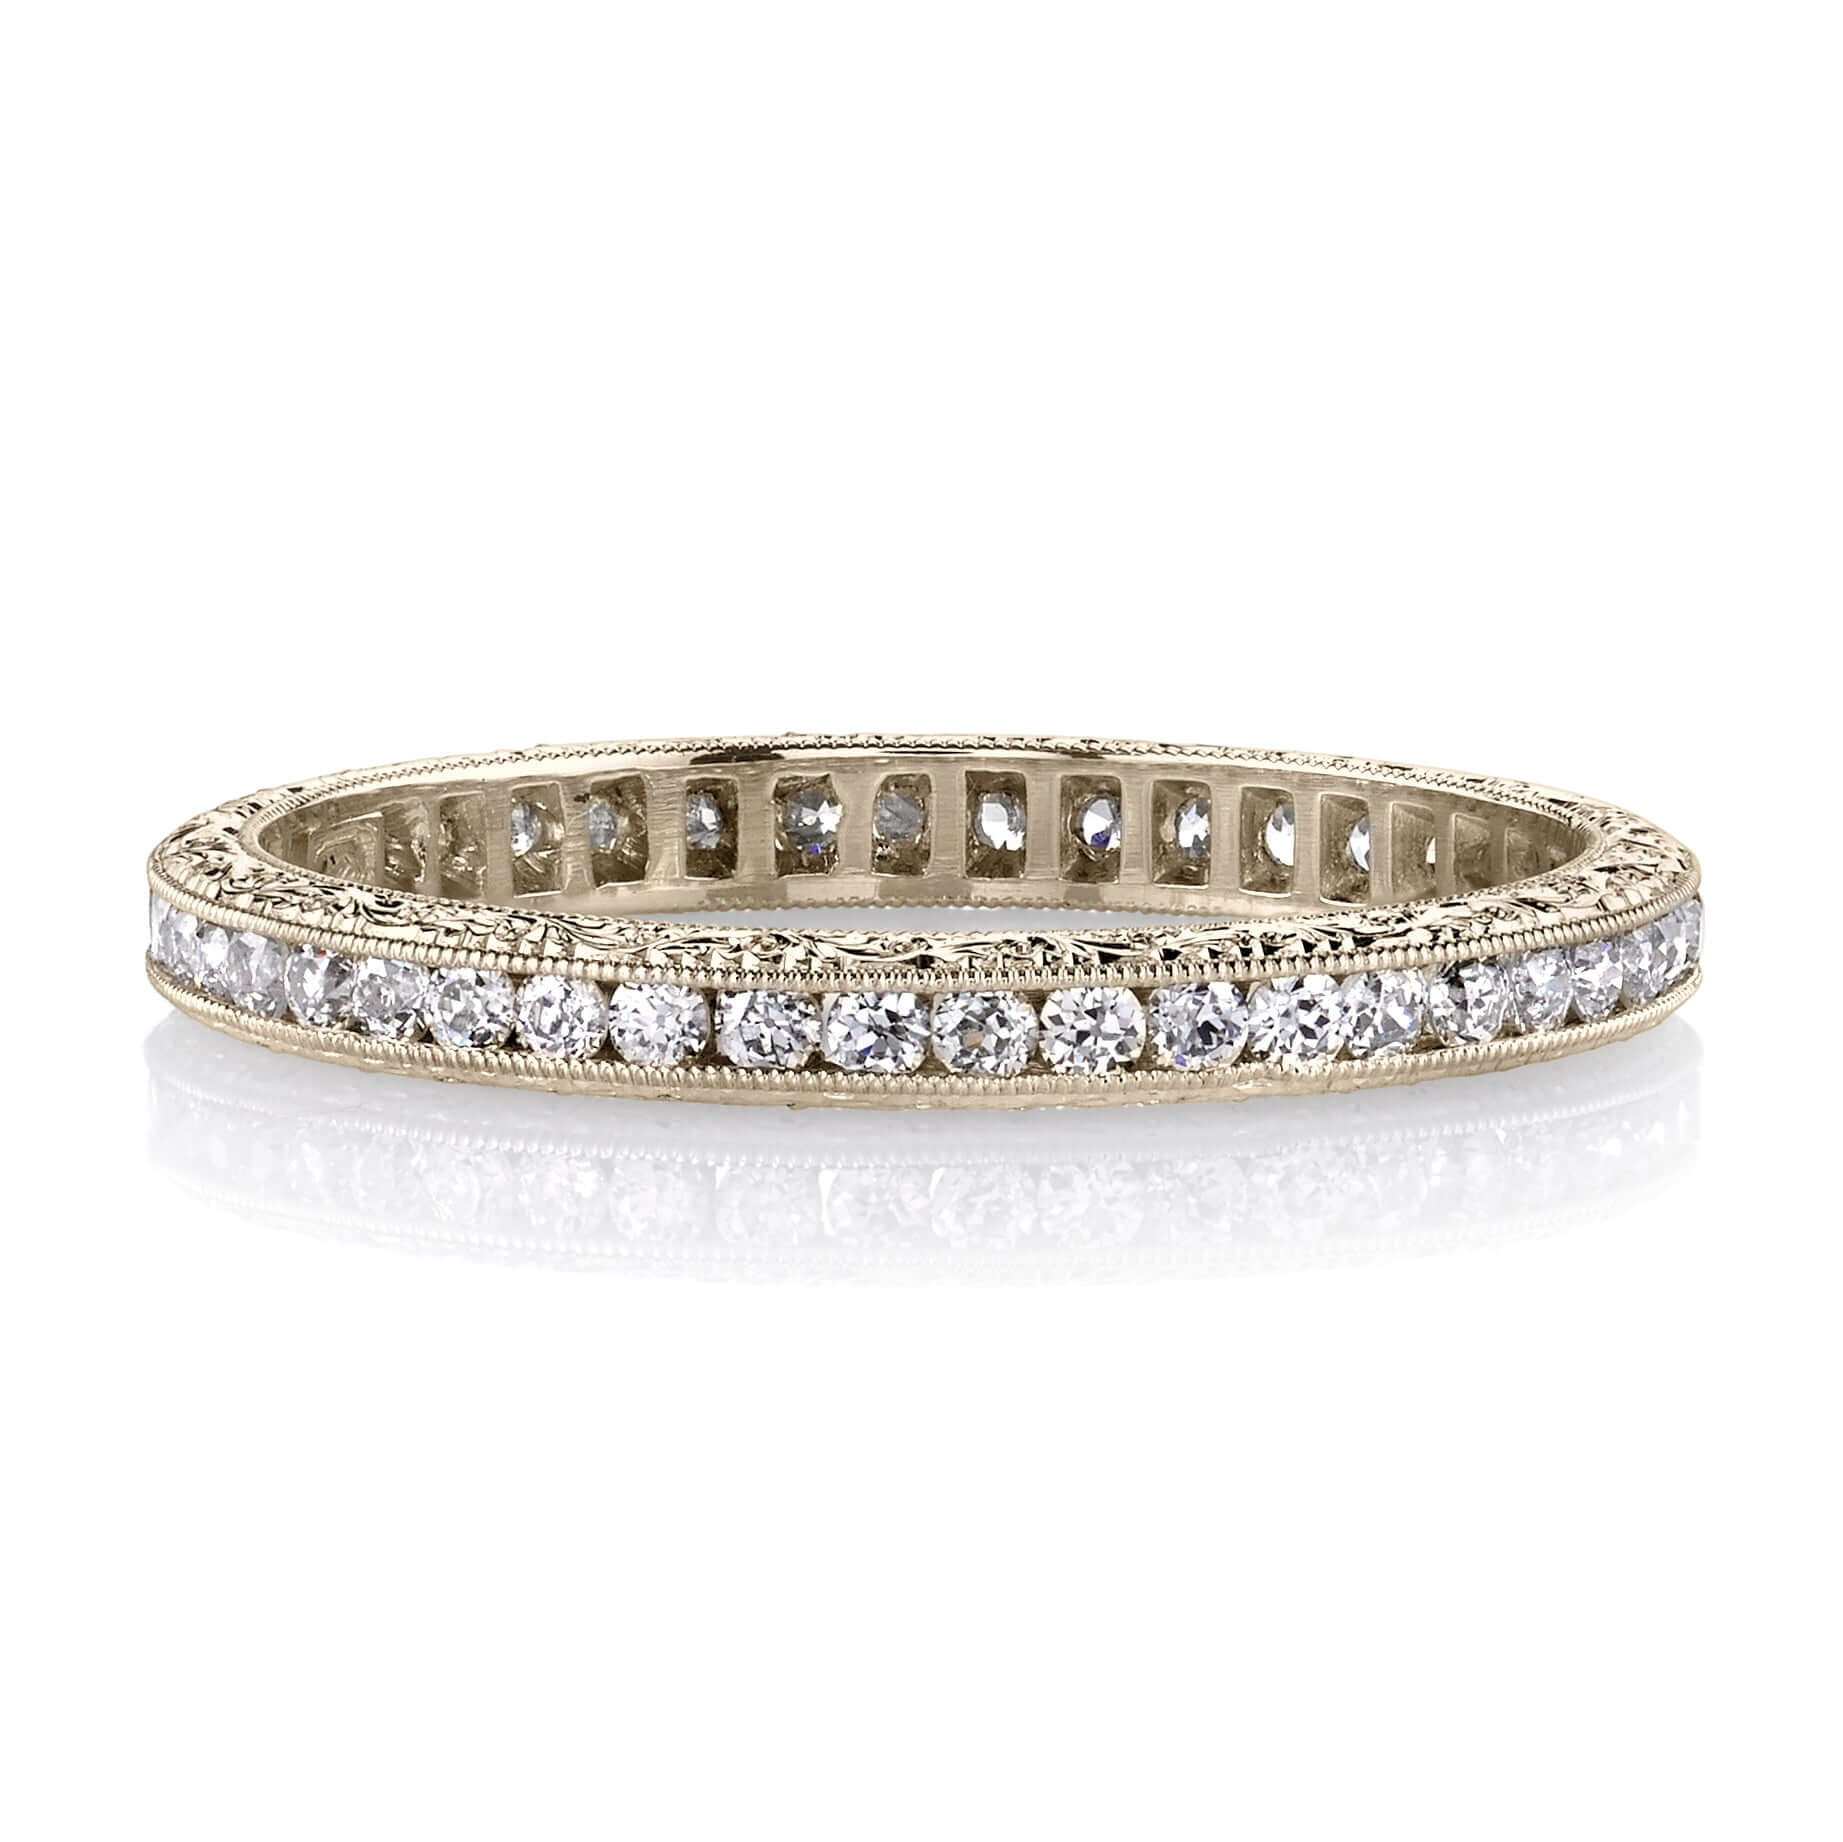 SINGLE STONE MADISON BAND | Approximately 0.40ctw old European cut diamonds channel set in a handcrafted eternity band. Available with polished or engraved sidewalls. Approximate band width 2.1mm.